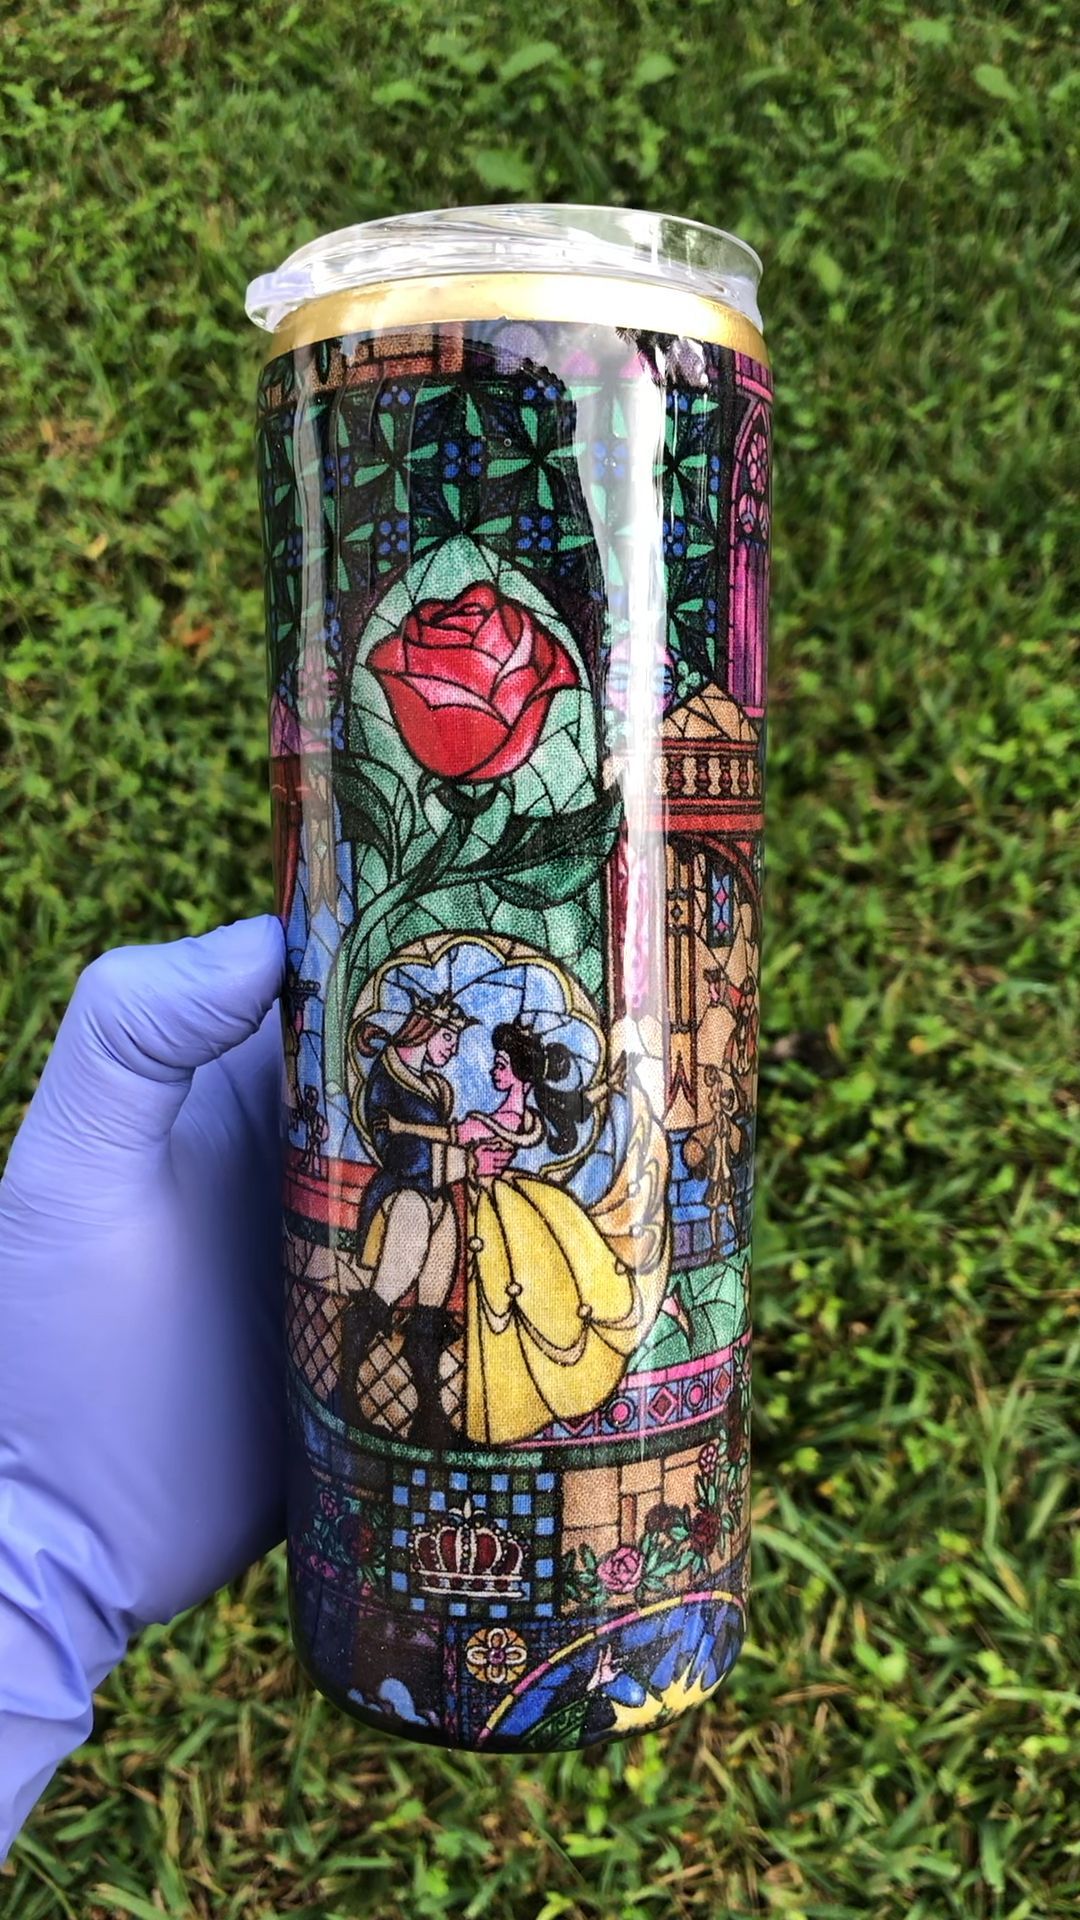 Beauty and the beast, Through the looking glass - Beauty and the beast, Through the looking glass -   20 beauty And The Beast diy ideas